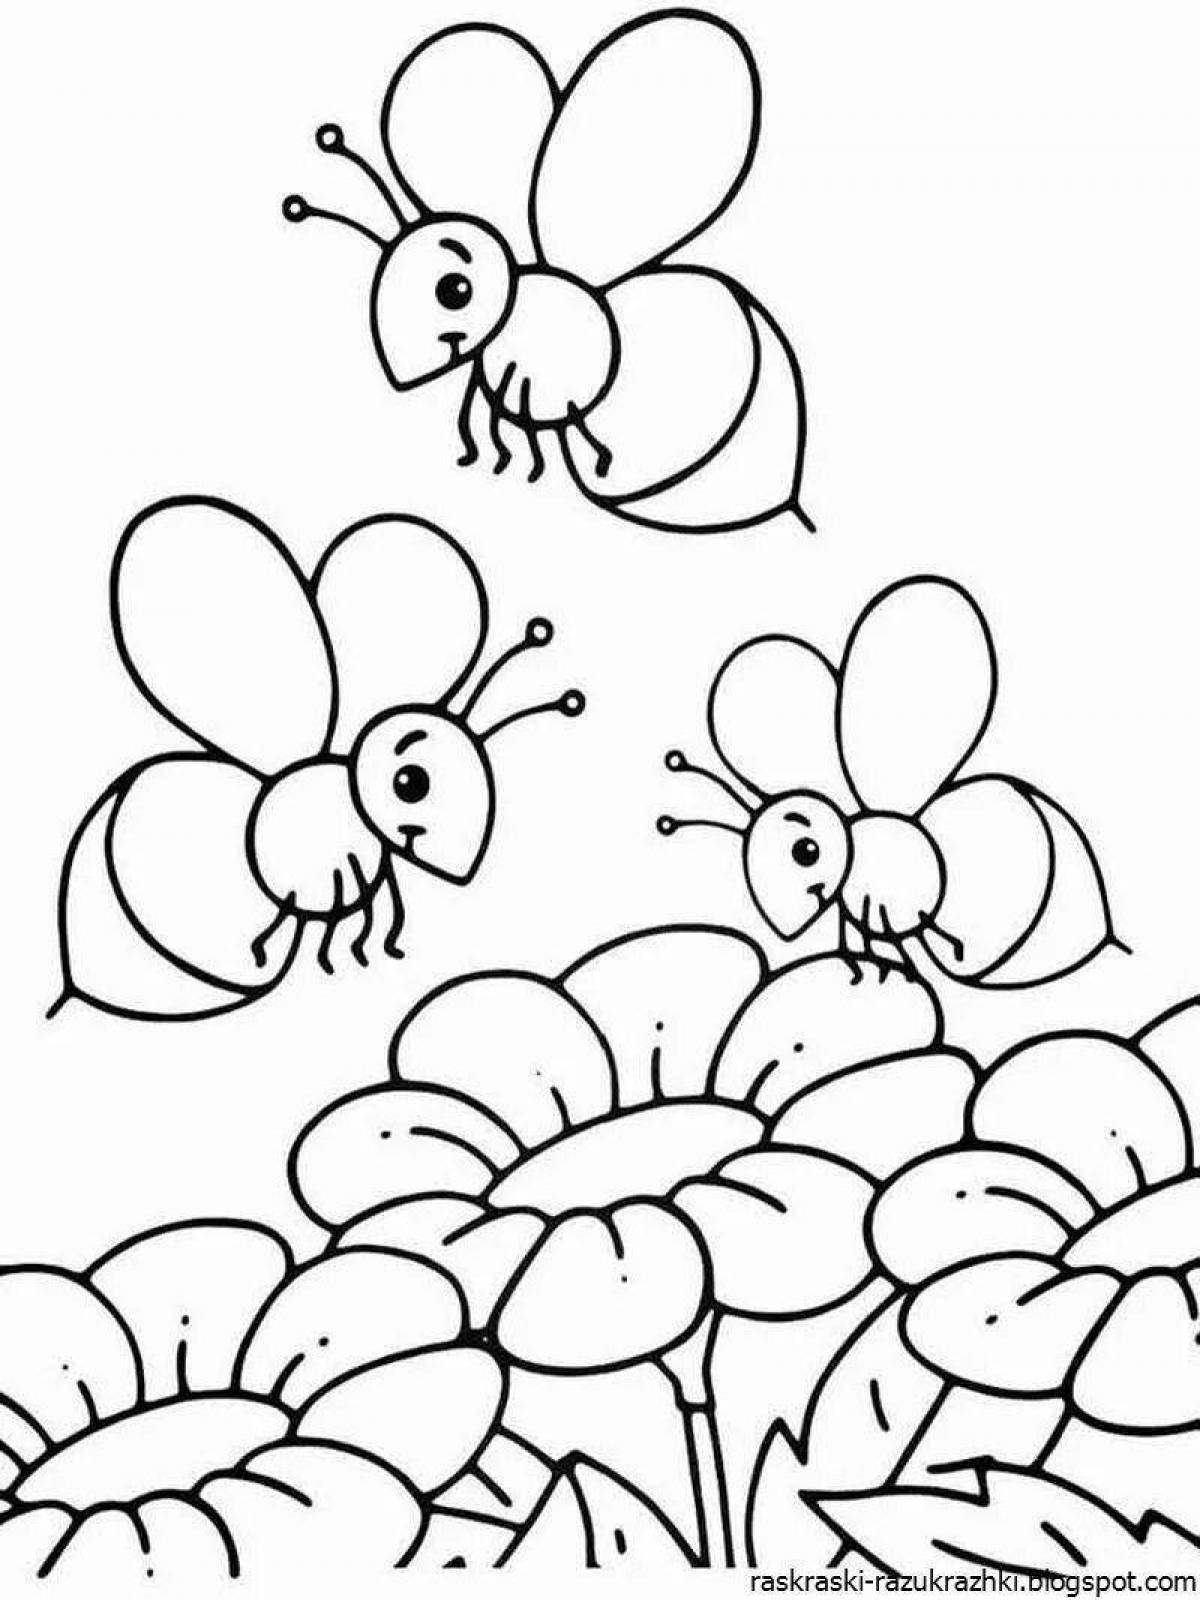 Fabulous bee coloring book for children 6-7 years old